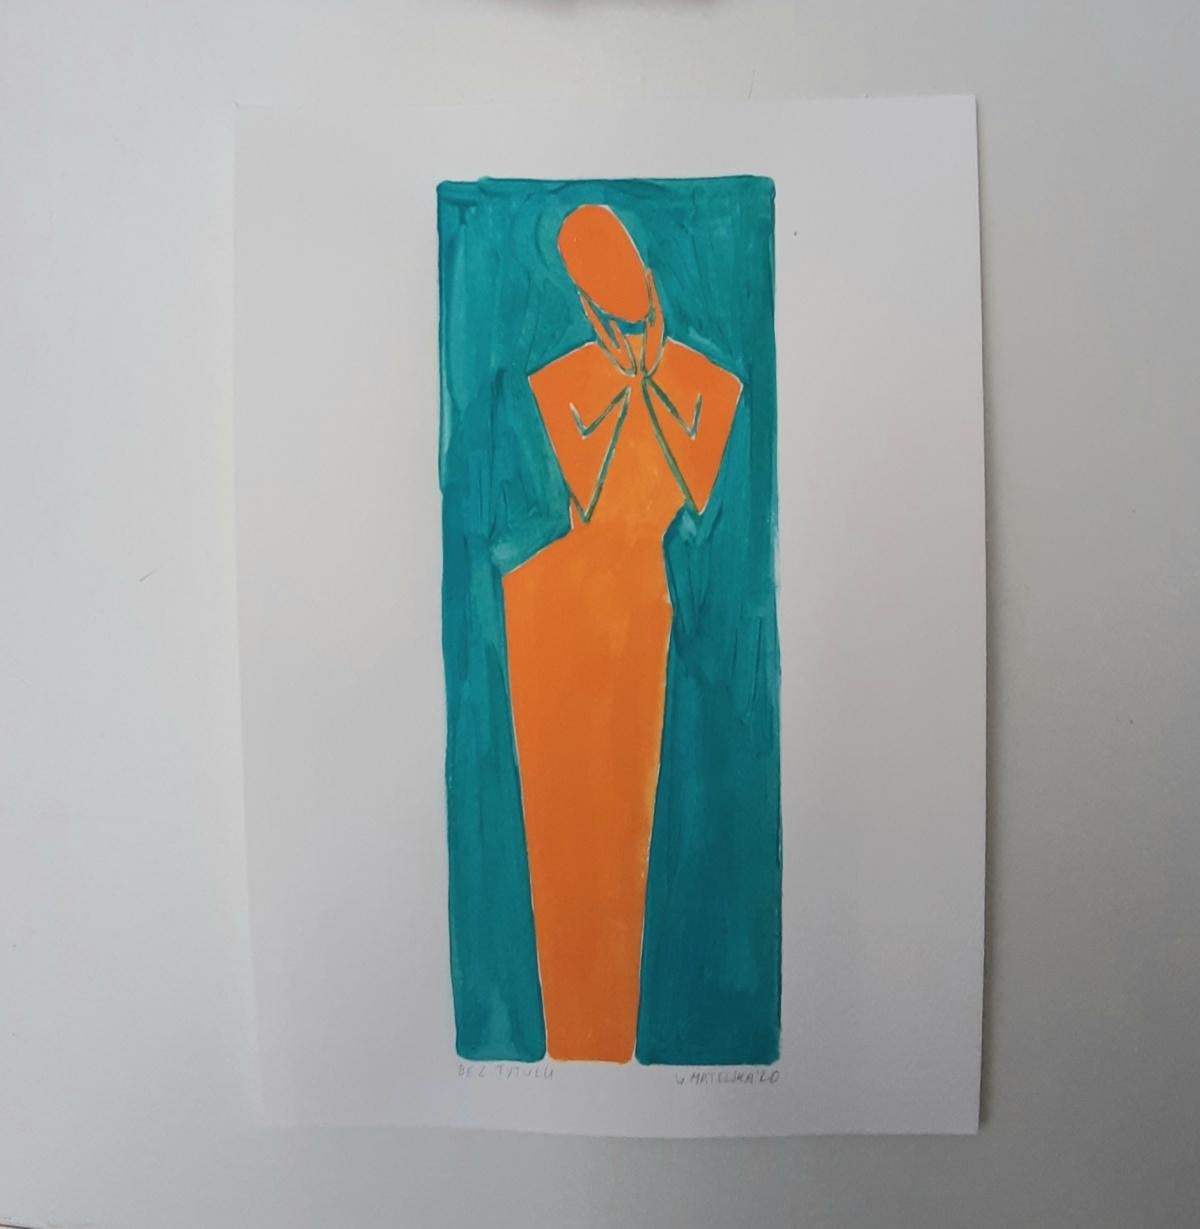 A muse - Figurative Painting on Paper, Young art Minimalism, Vibrant 